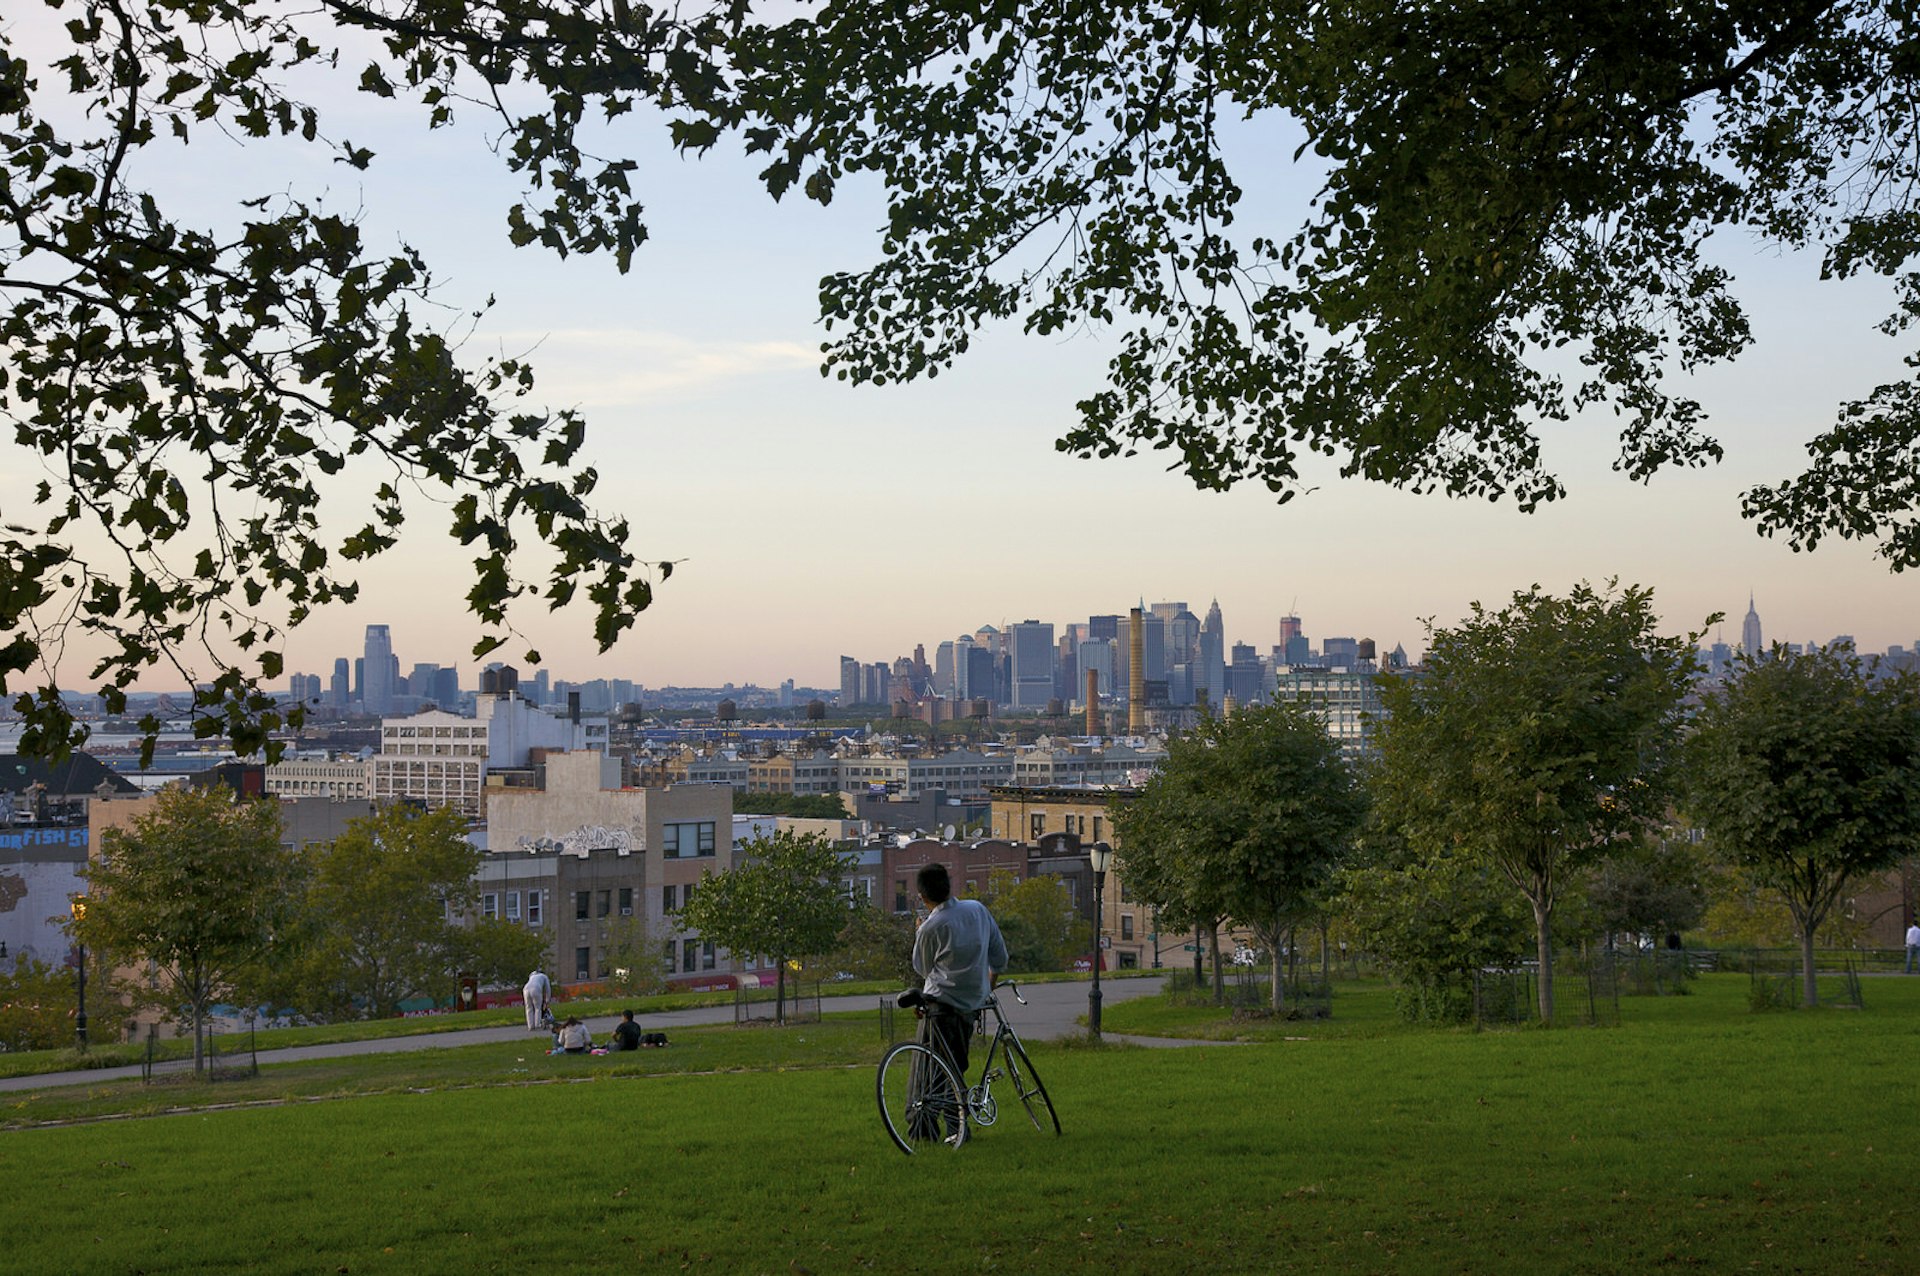 Sunset Park [pictured] offers spectacular views of the Manhattan skyline © Barry Winiker / Getty Images